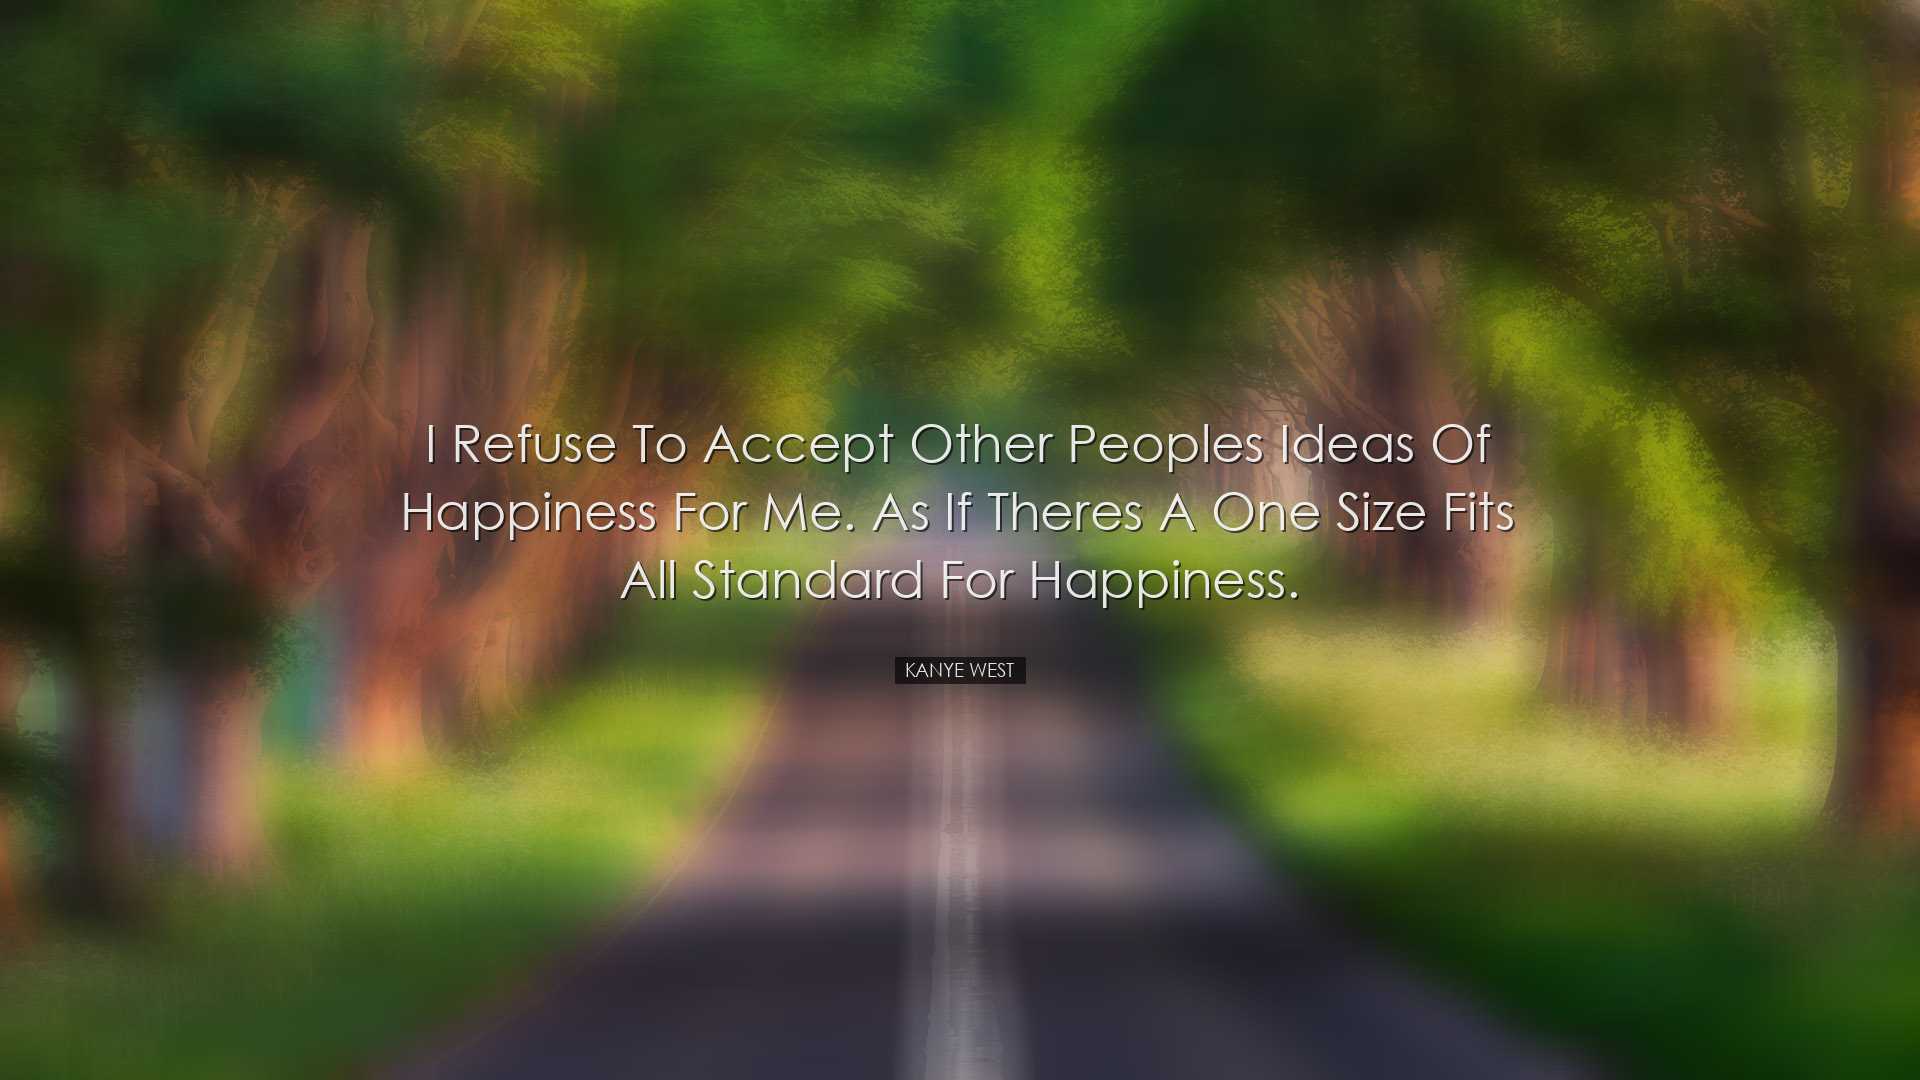 I refuse to accept other peoples ideas of happiness for me. As if